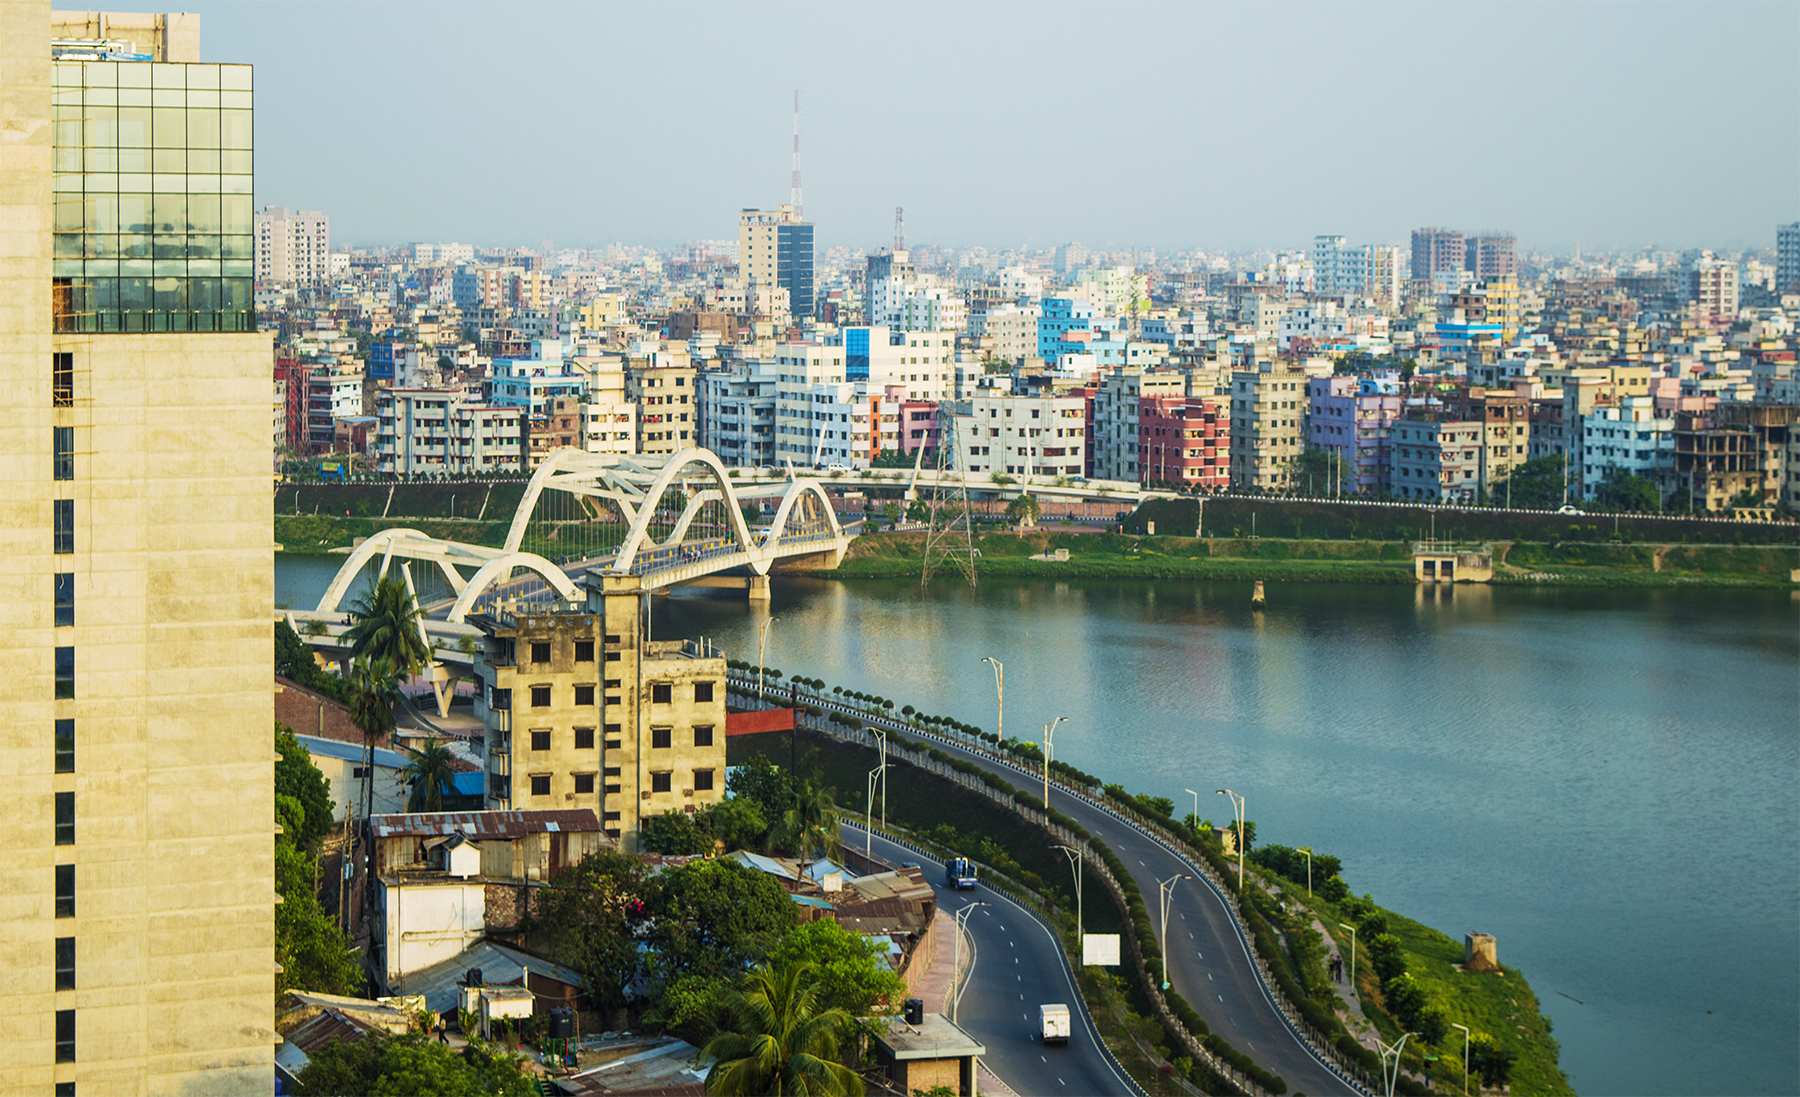 Is dhaka a costly city?